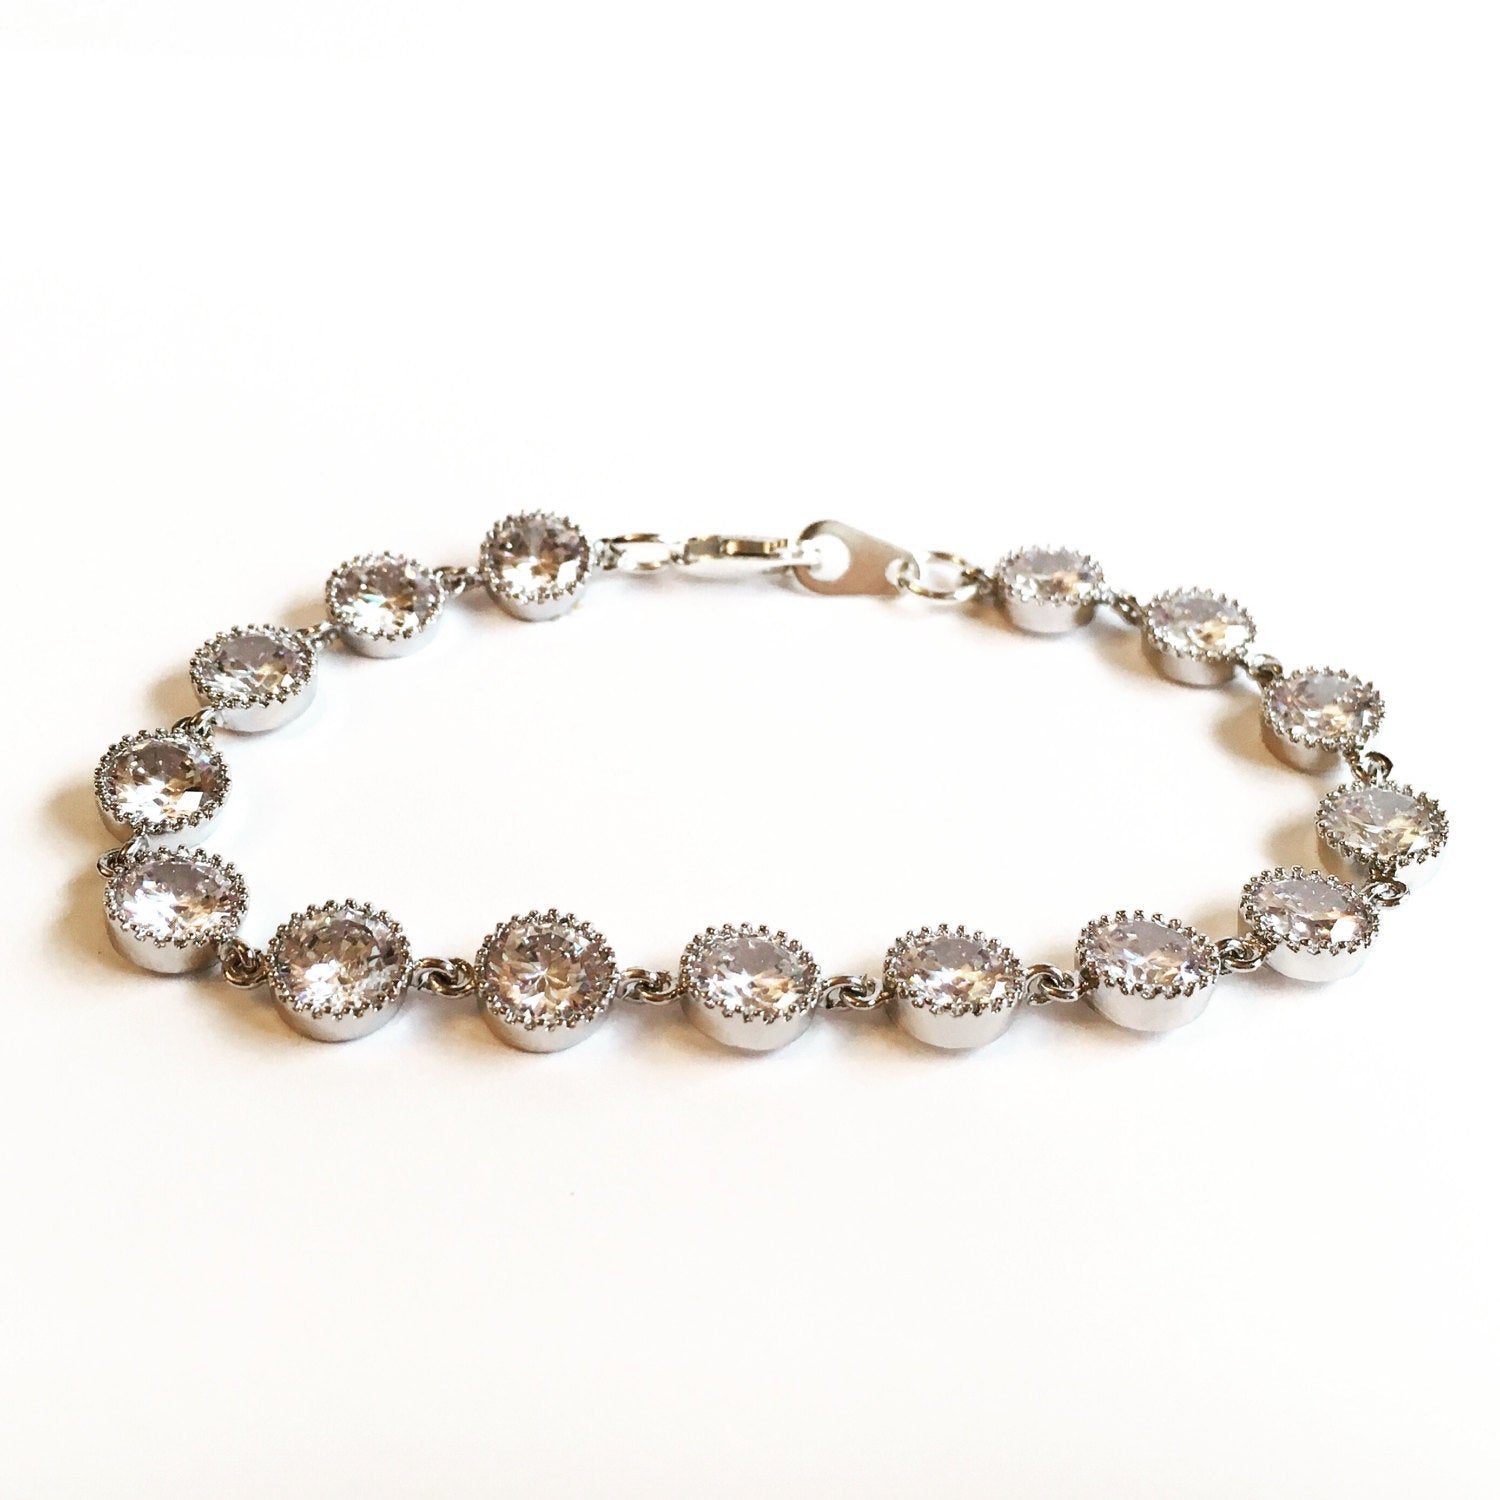 Cubic zirconia crystals set in silver color rhodium plated brass bracelet. 